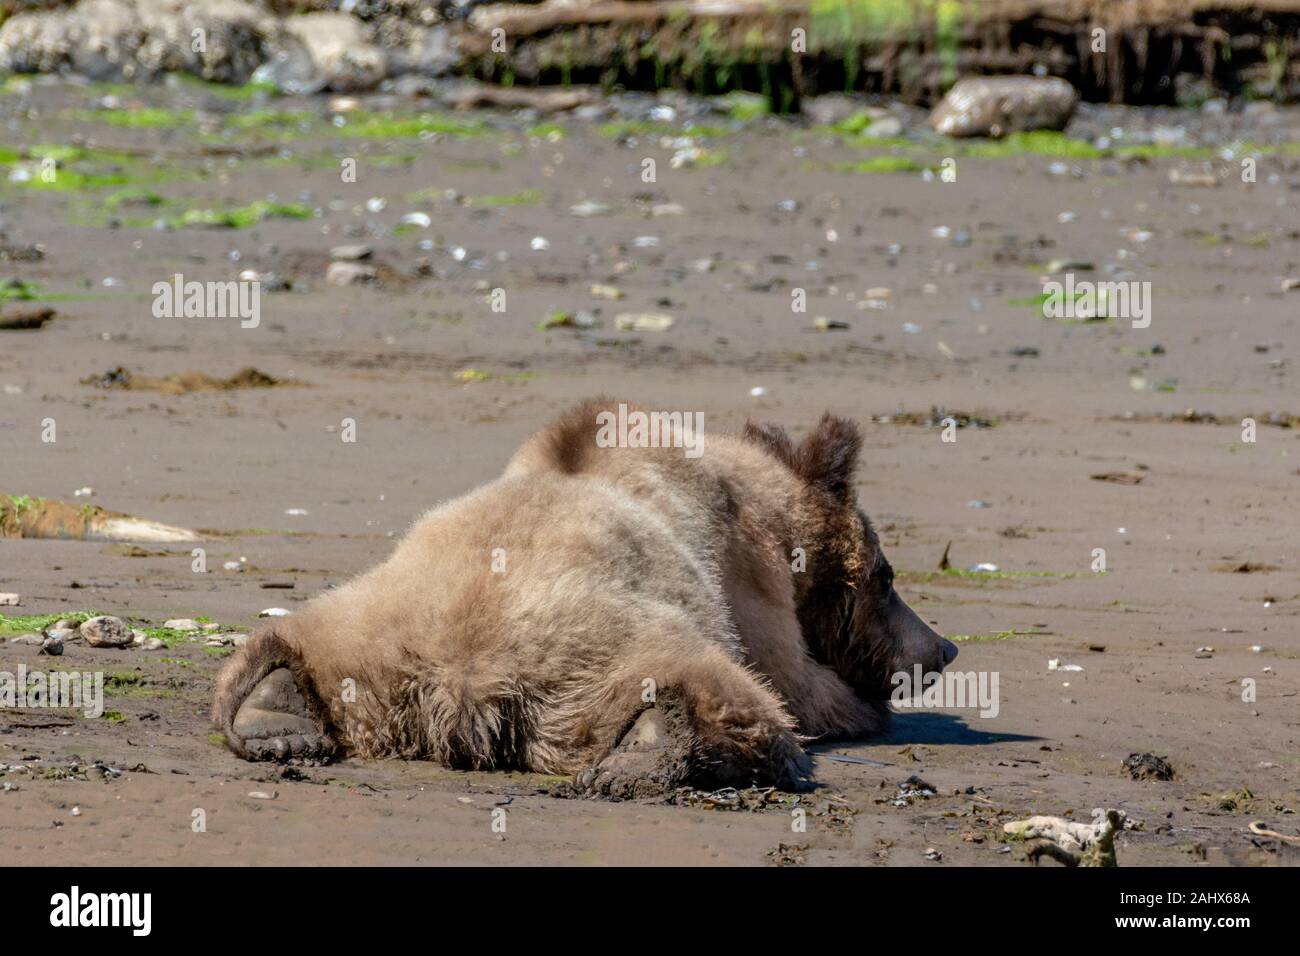 Relaxing 4 year old grizzly on clam beach, Khutzeymateen, British Columbia Stock Photo